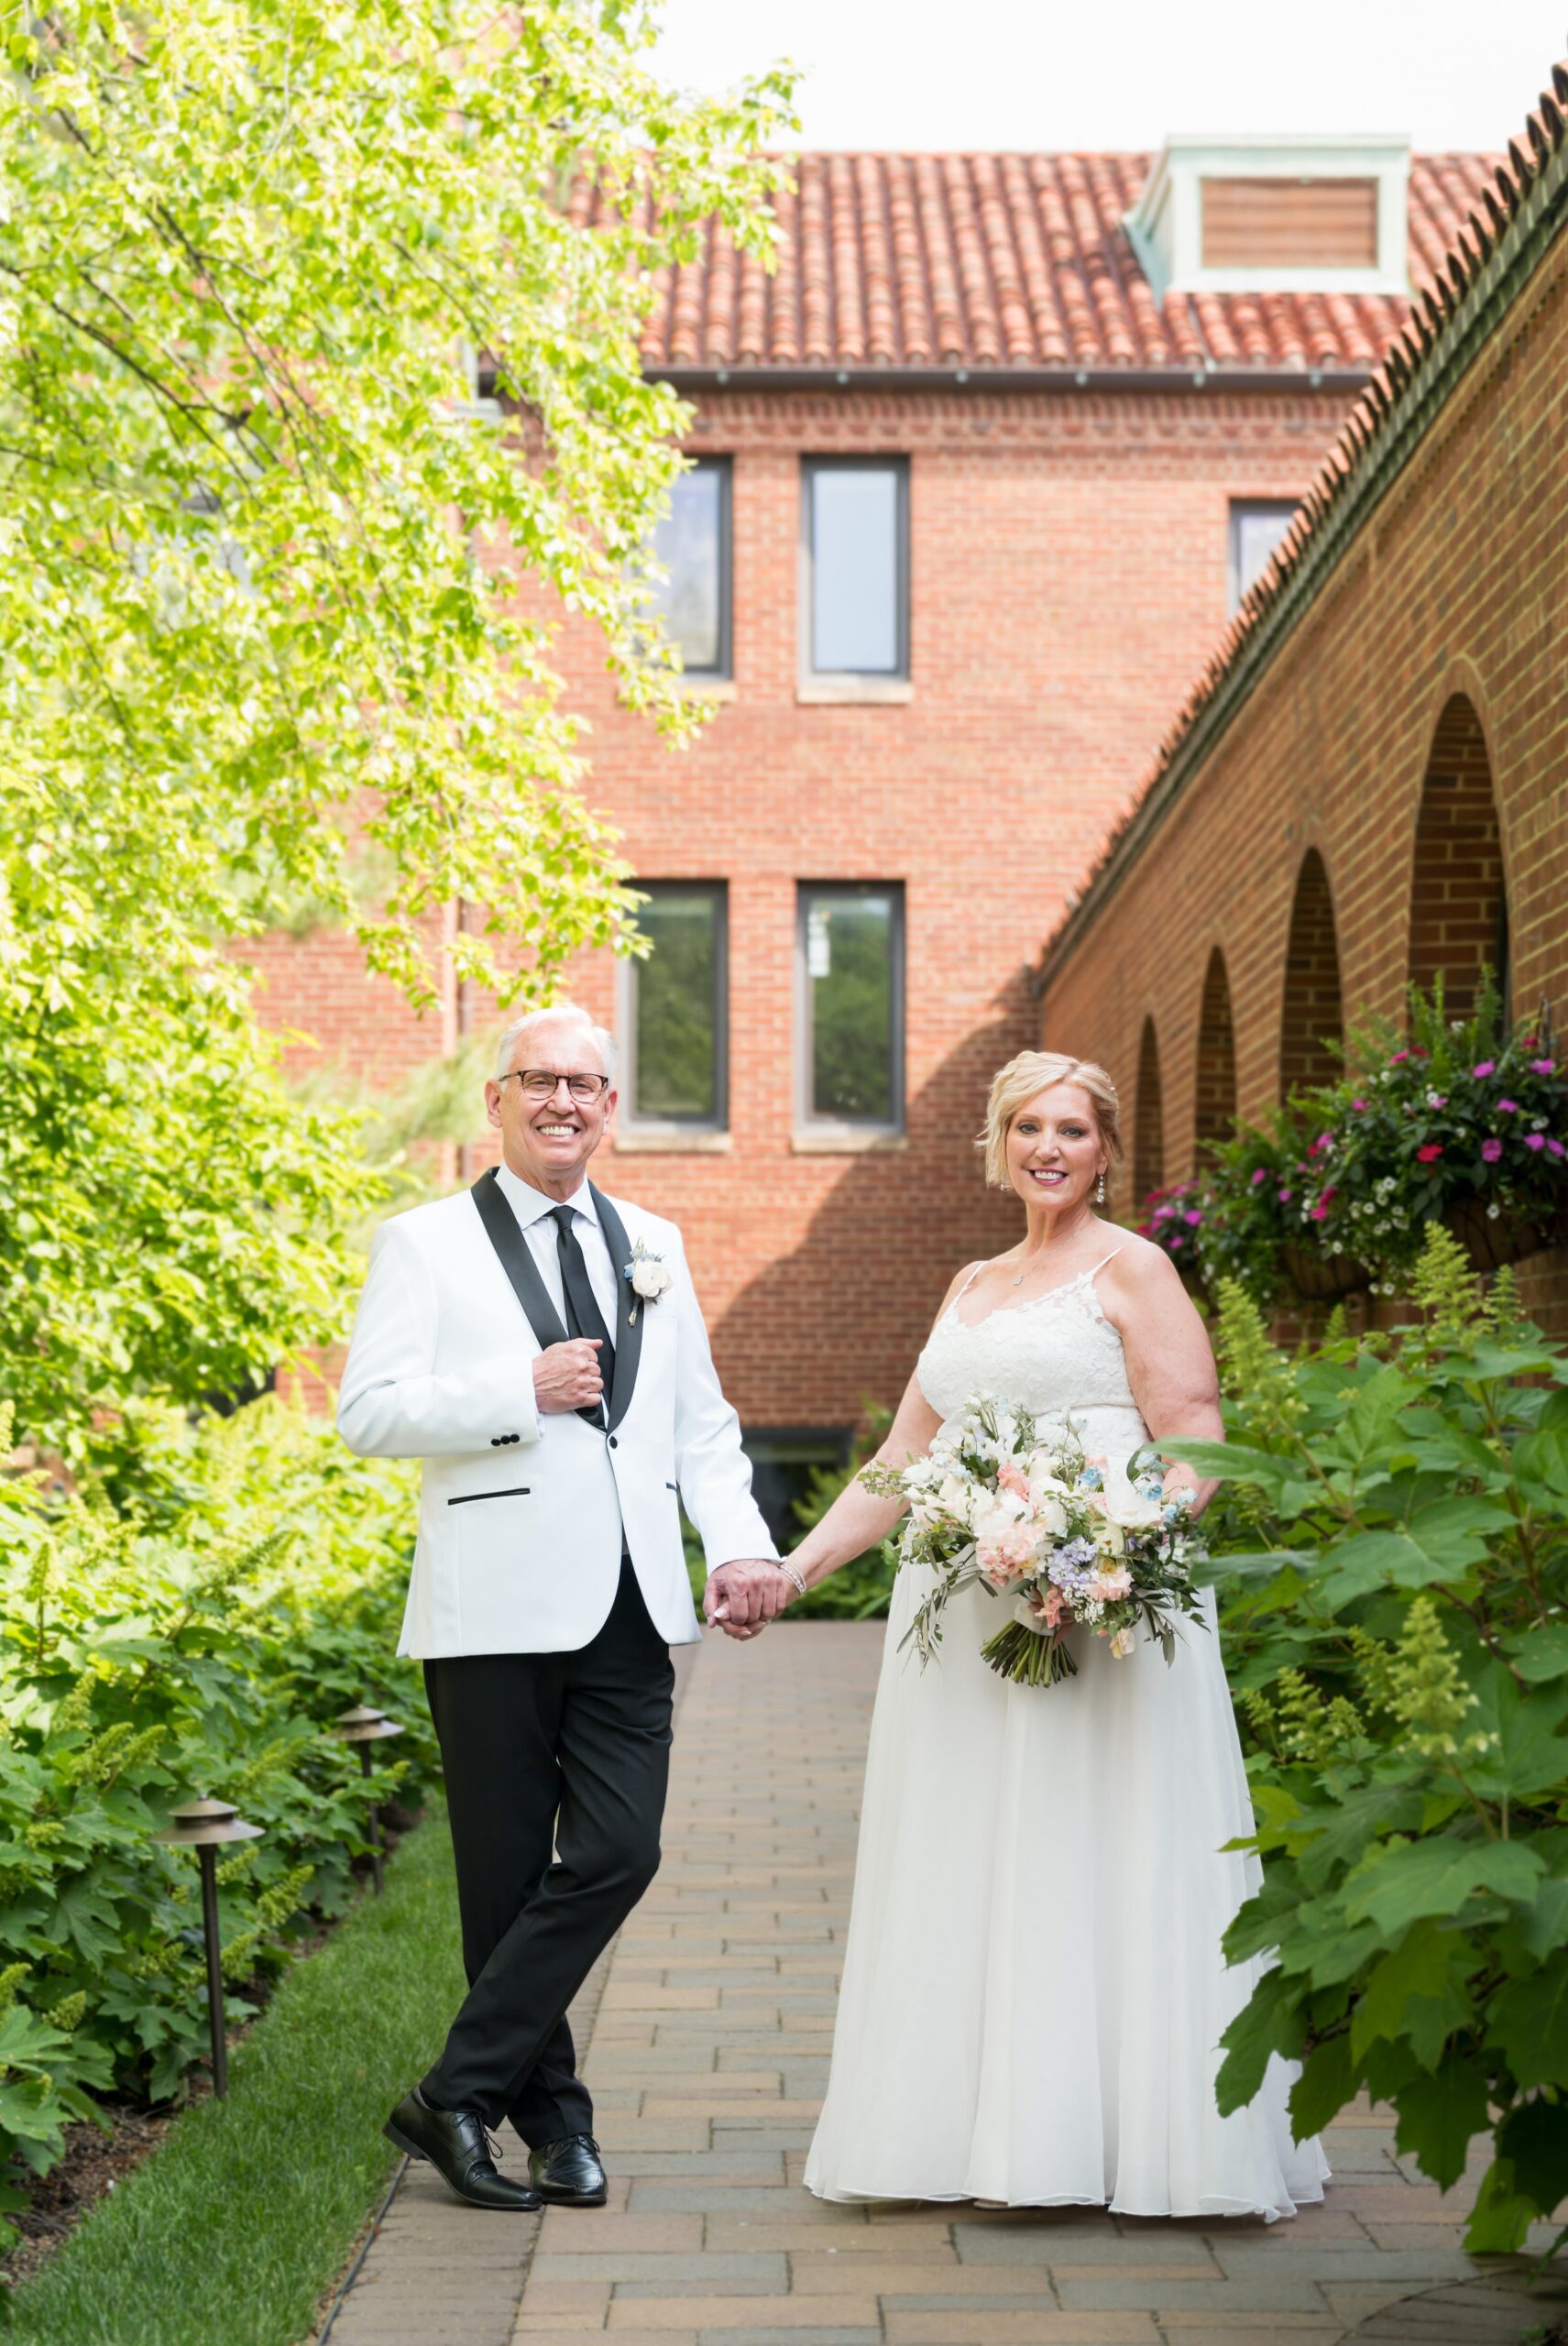 A couple poses for a portrait in the courtyard of their private wedding at St. John's Resort.